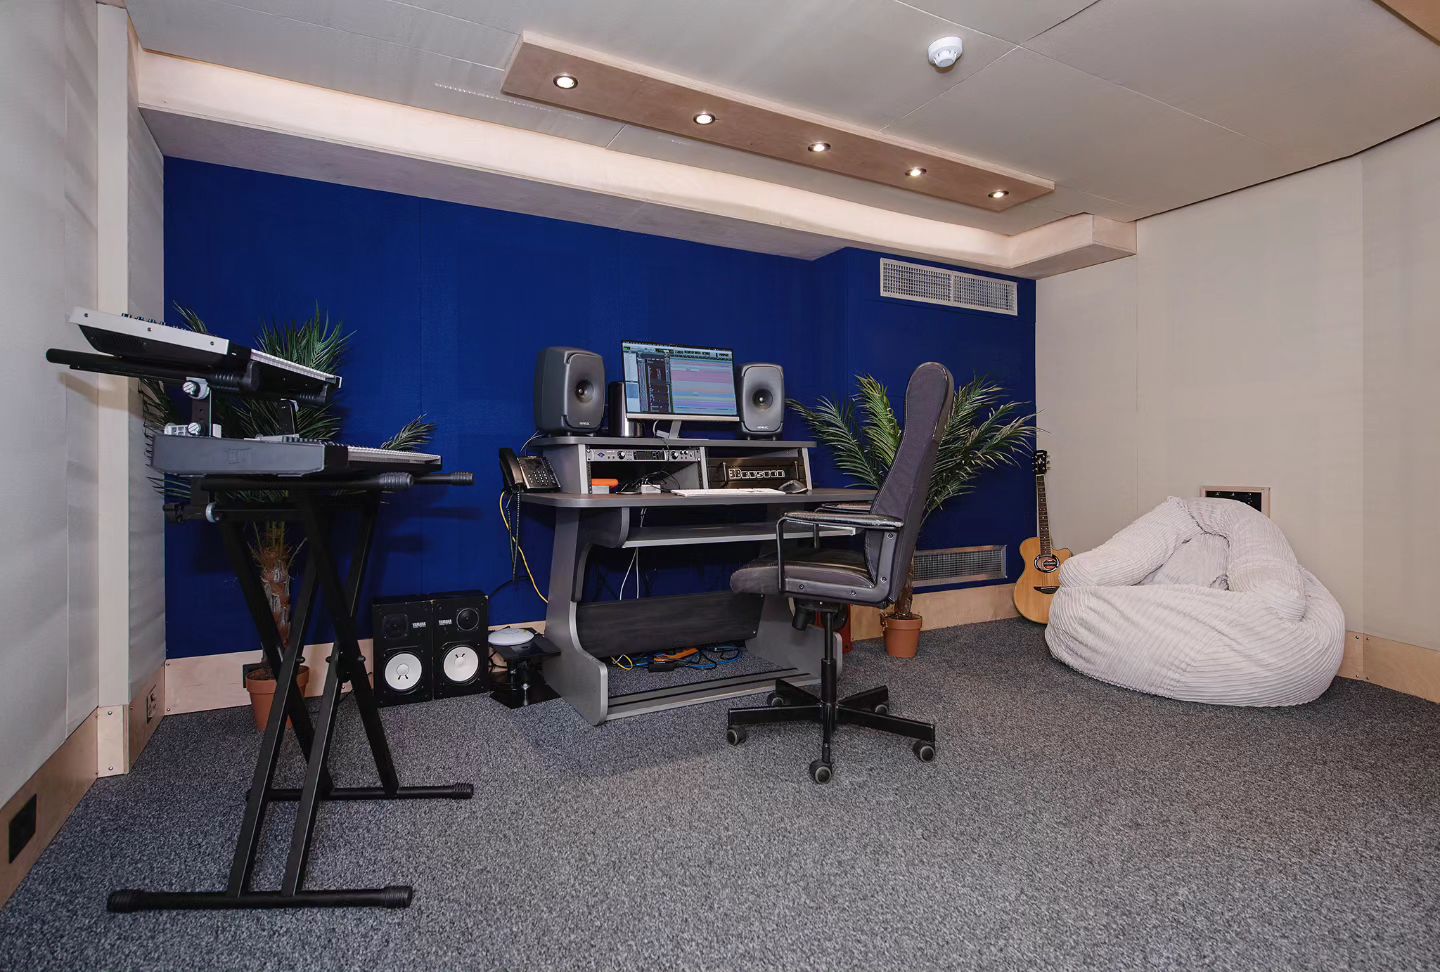 We've got exciting news!

Suite 2 at Metropolis Studios is the perfect writing getaway and now available for dry hire.

️Assistance will be provided with setting up and a runner will be on hand from 10 am to 6 pm.
️The room is equipped with a Zaor Studio Desk.
️Parking is available upon request - limited availability.

To make enquiries about this room, see more photos, or to learn more, message us here, or contact us at: studios@https://www.thisismetropolis.com